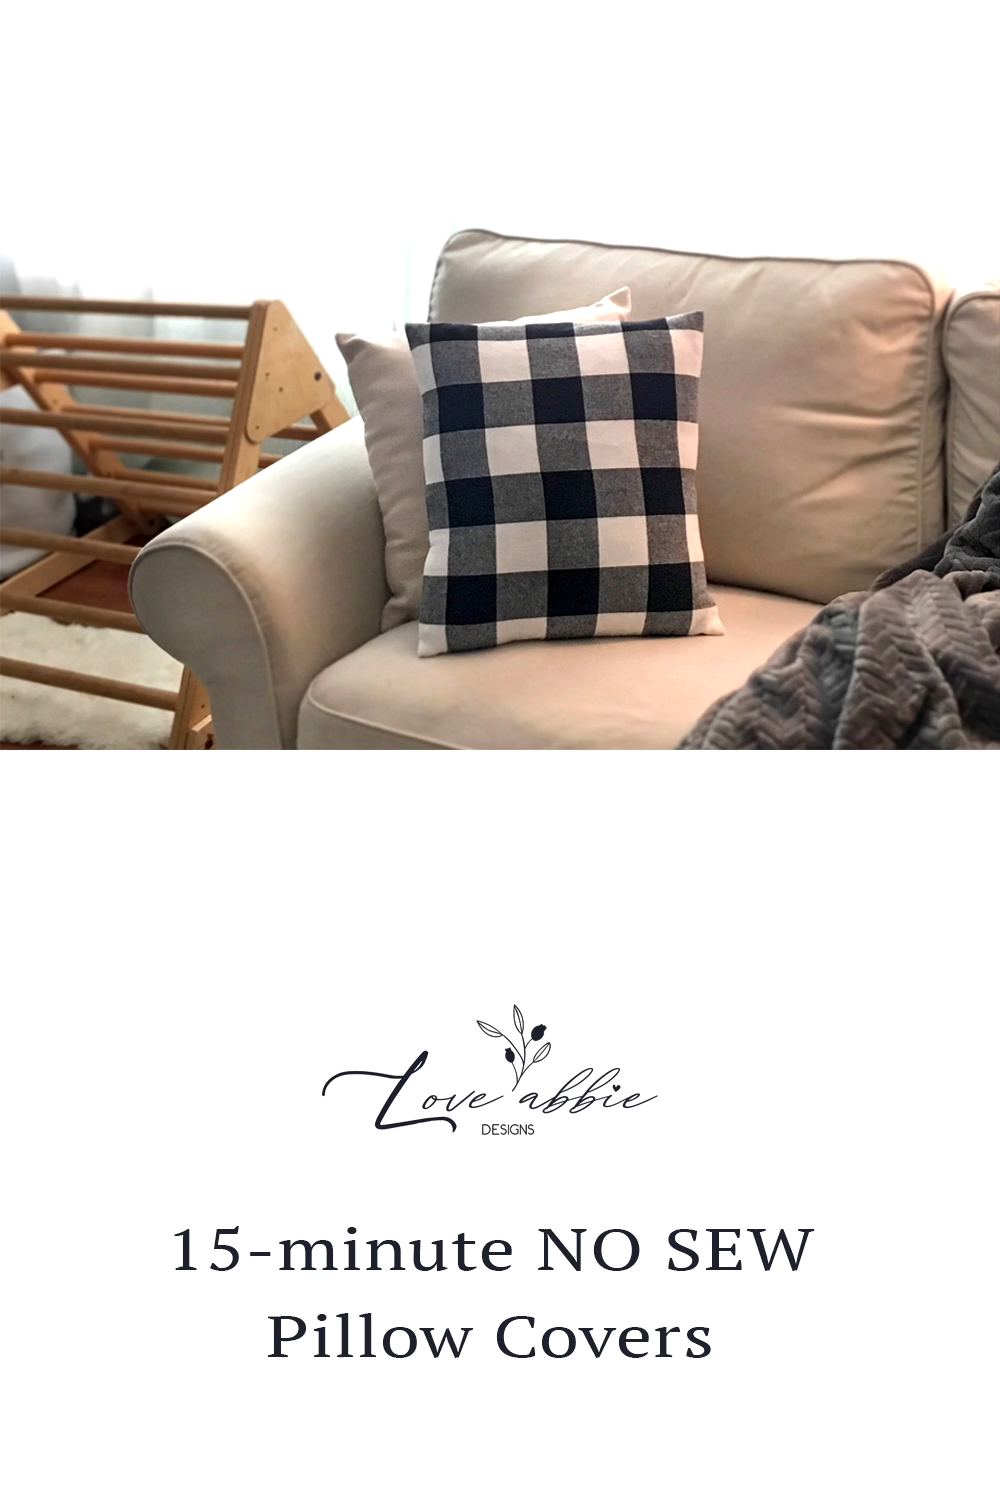 15 Minute No-Sew DIY Pillow Covers - 15 Minute No-Sew DIY Pillow Covers -   19 diy Pillows couch ideas